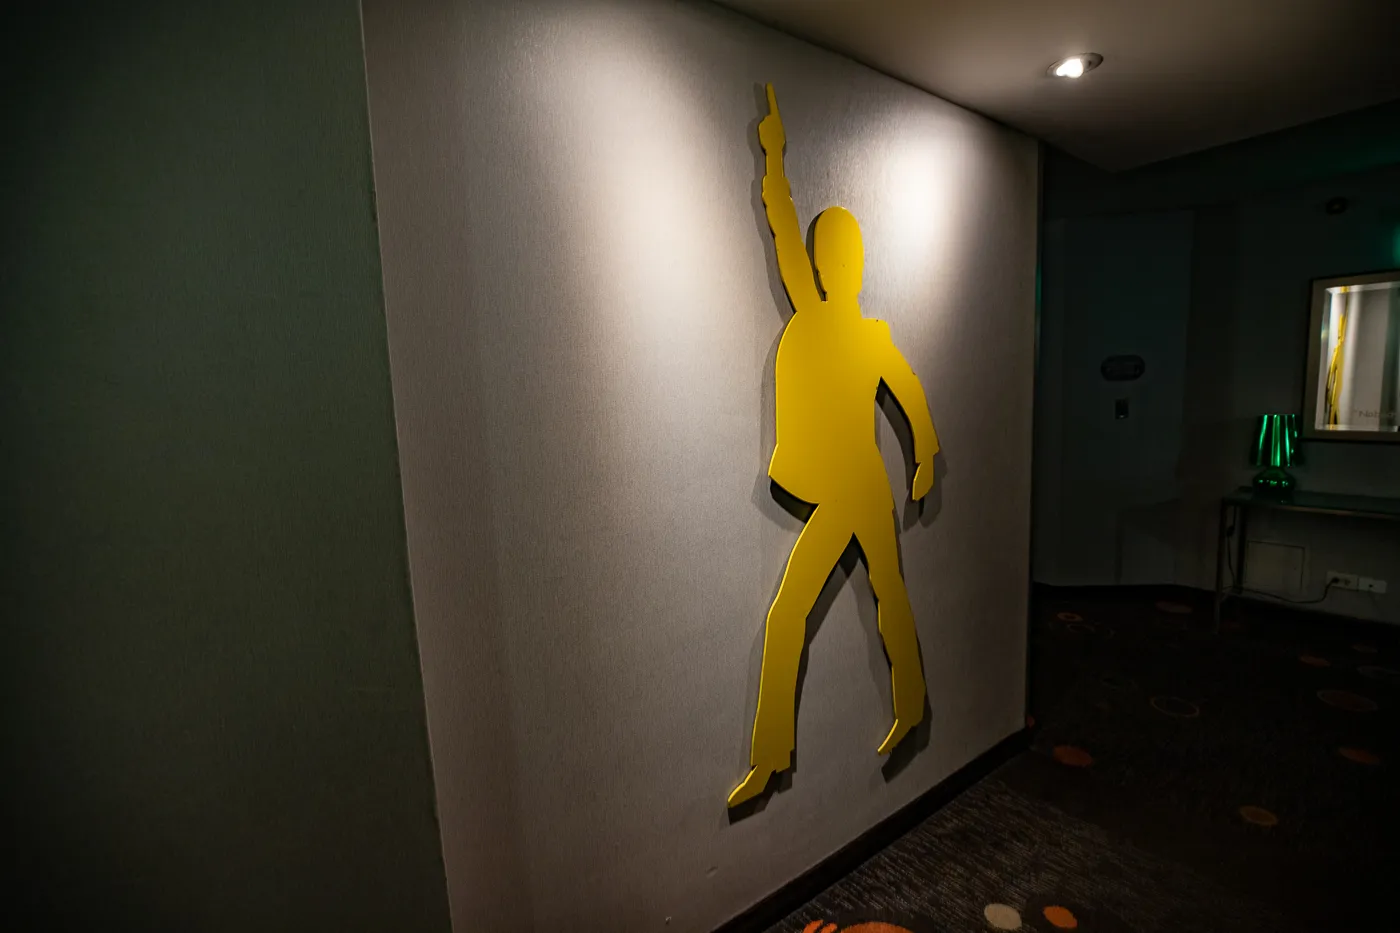 Dance themed floor of The Curtis Hotel - a Themed Hotel in Denver, Colorado